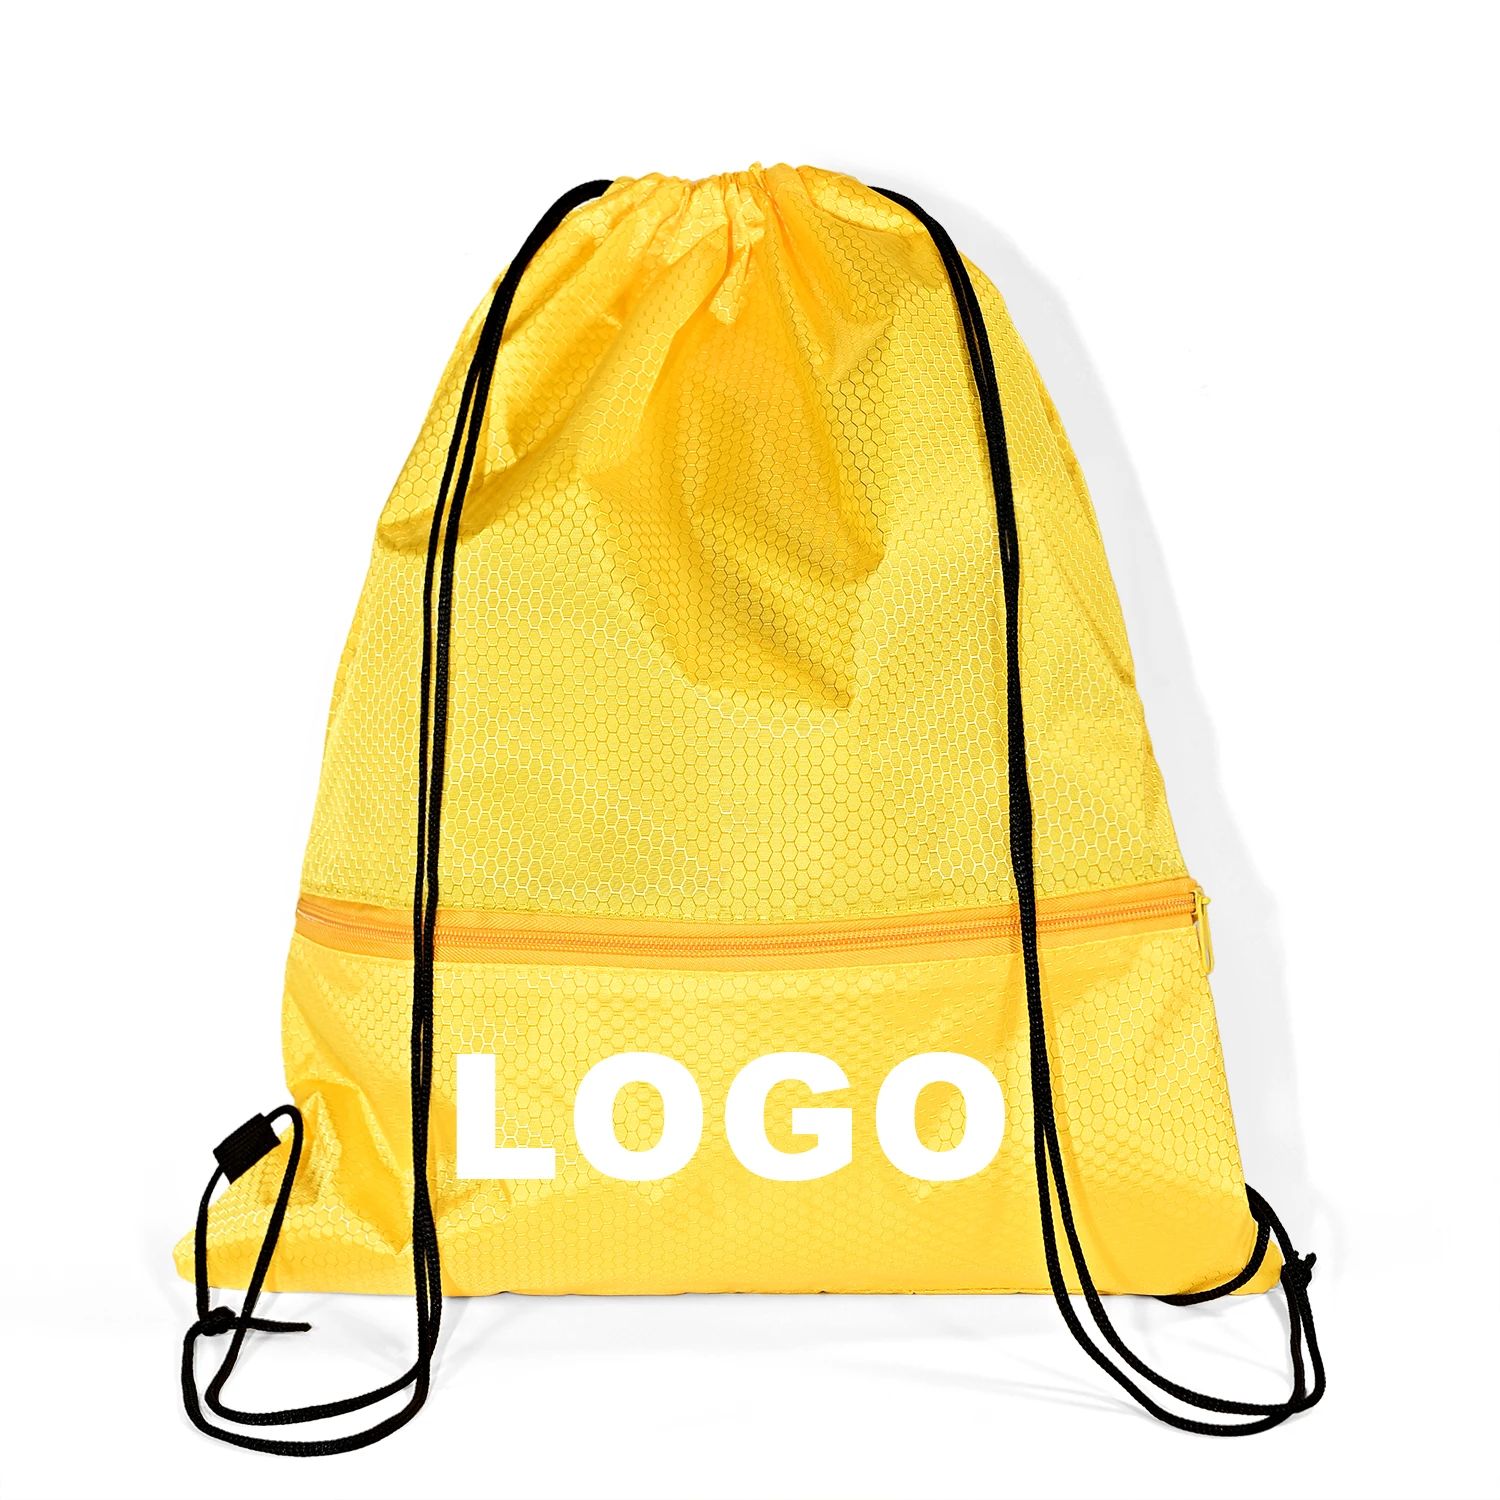 Personalized Gym Backpack Custom Name Kids Drawstring Swimming Bag Sports Bag Birthday Party Gifts